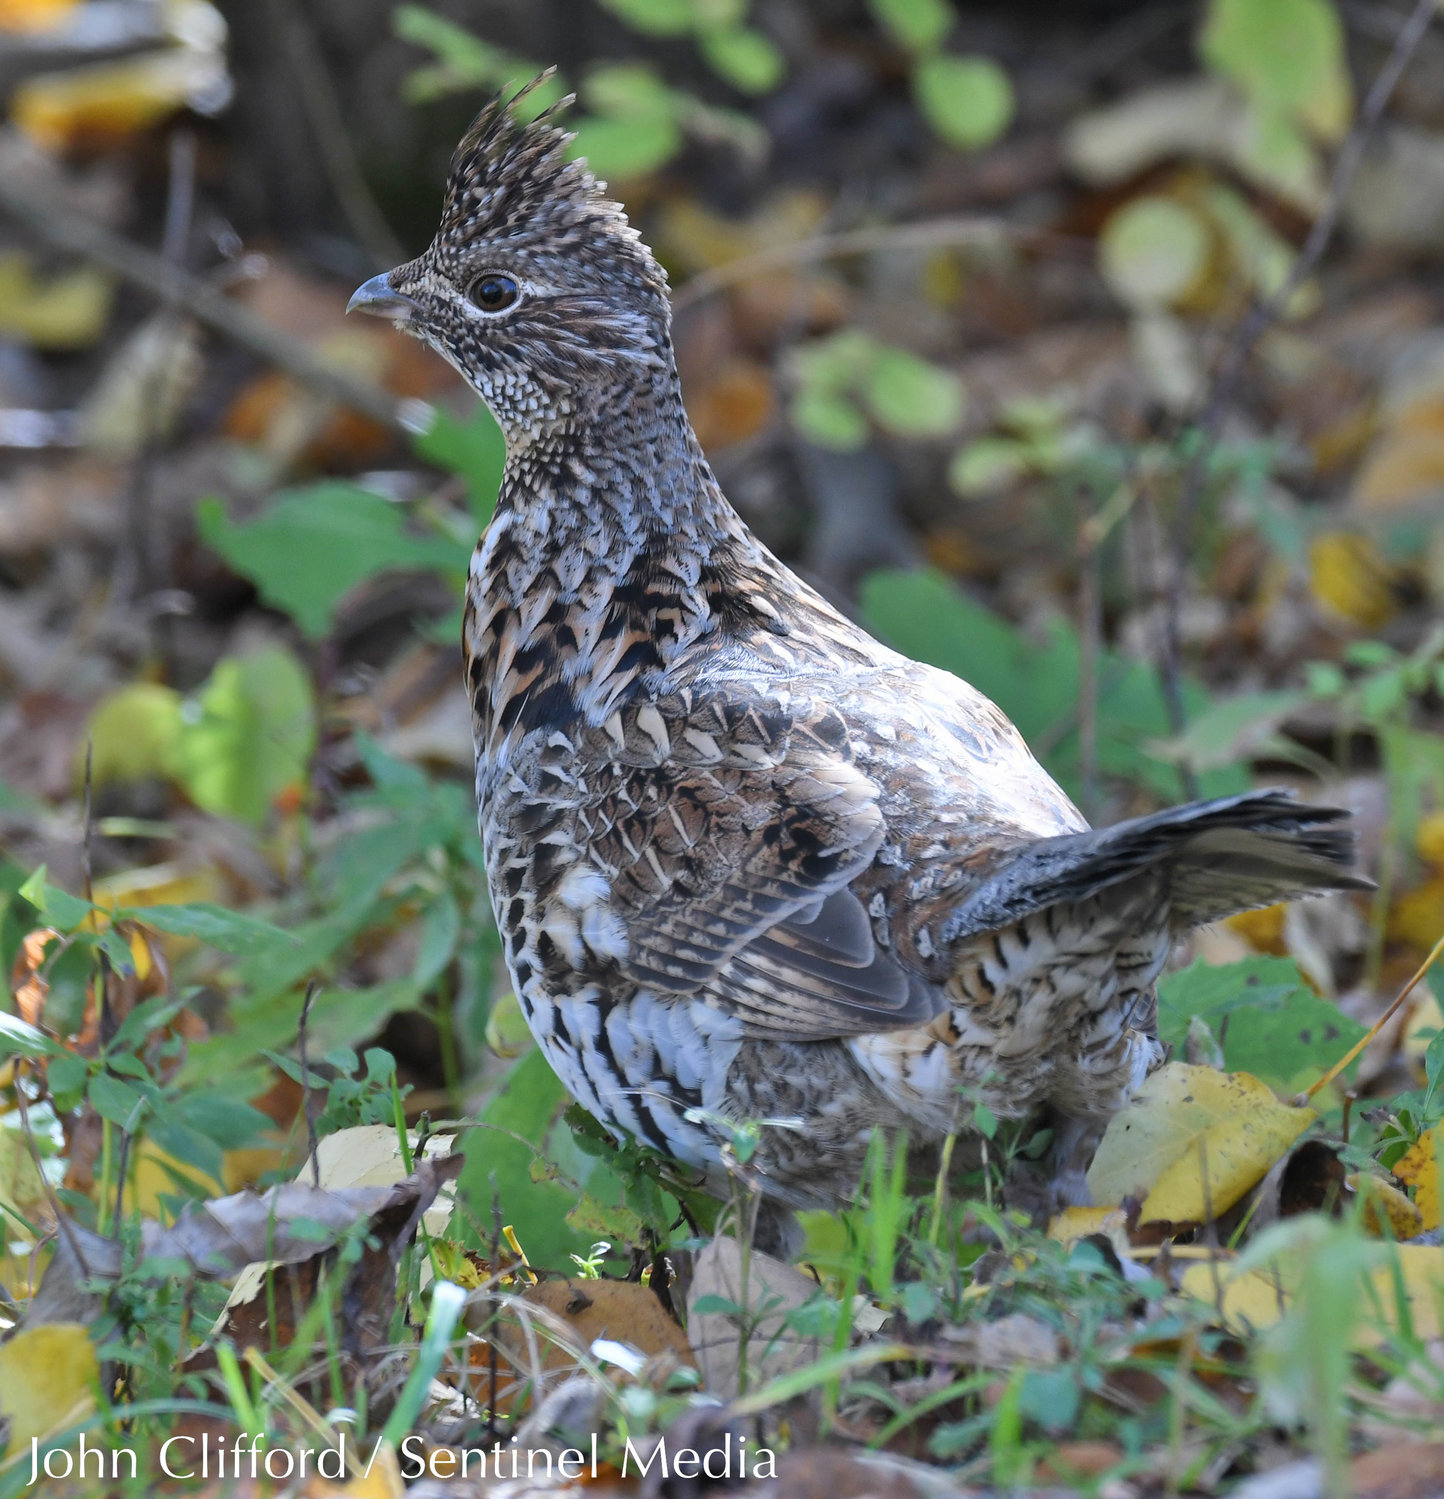 A ruffed grouse in the town of Boonville on Friday, October 21, 2022.